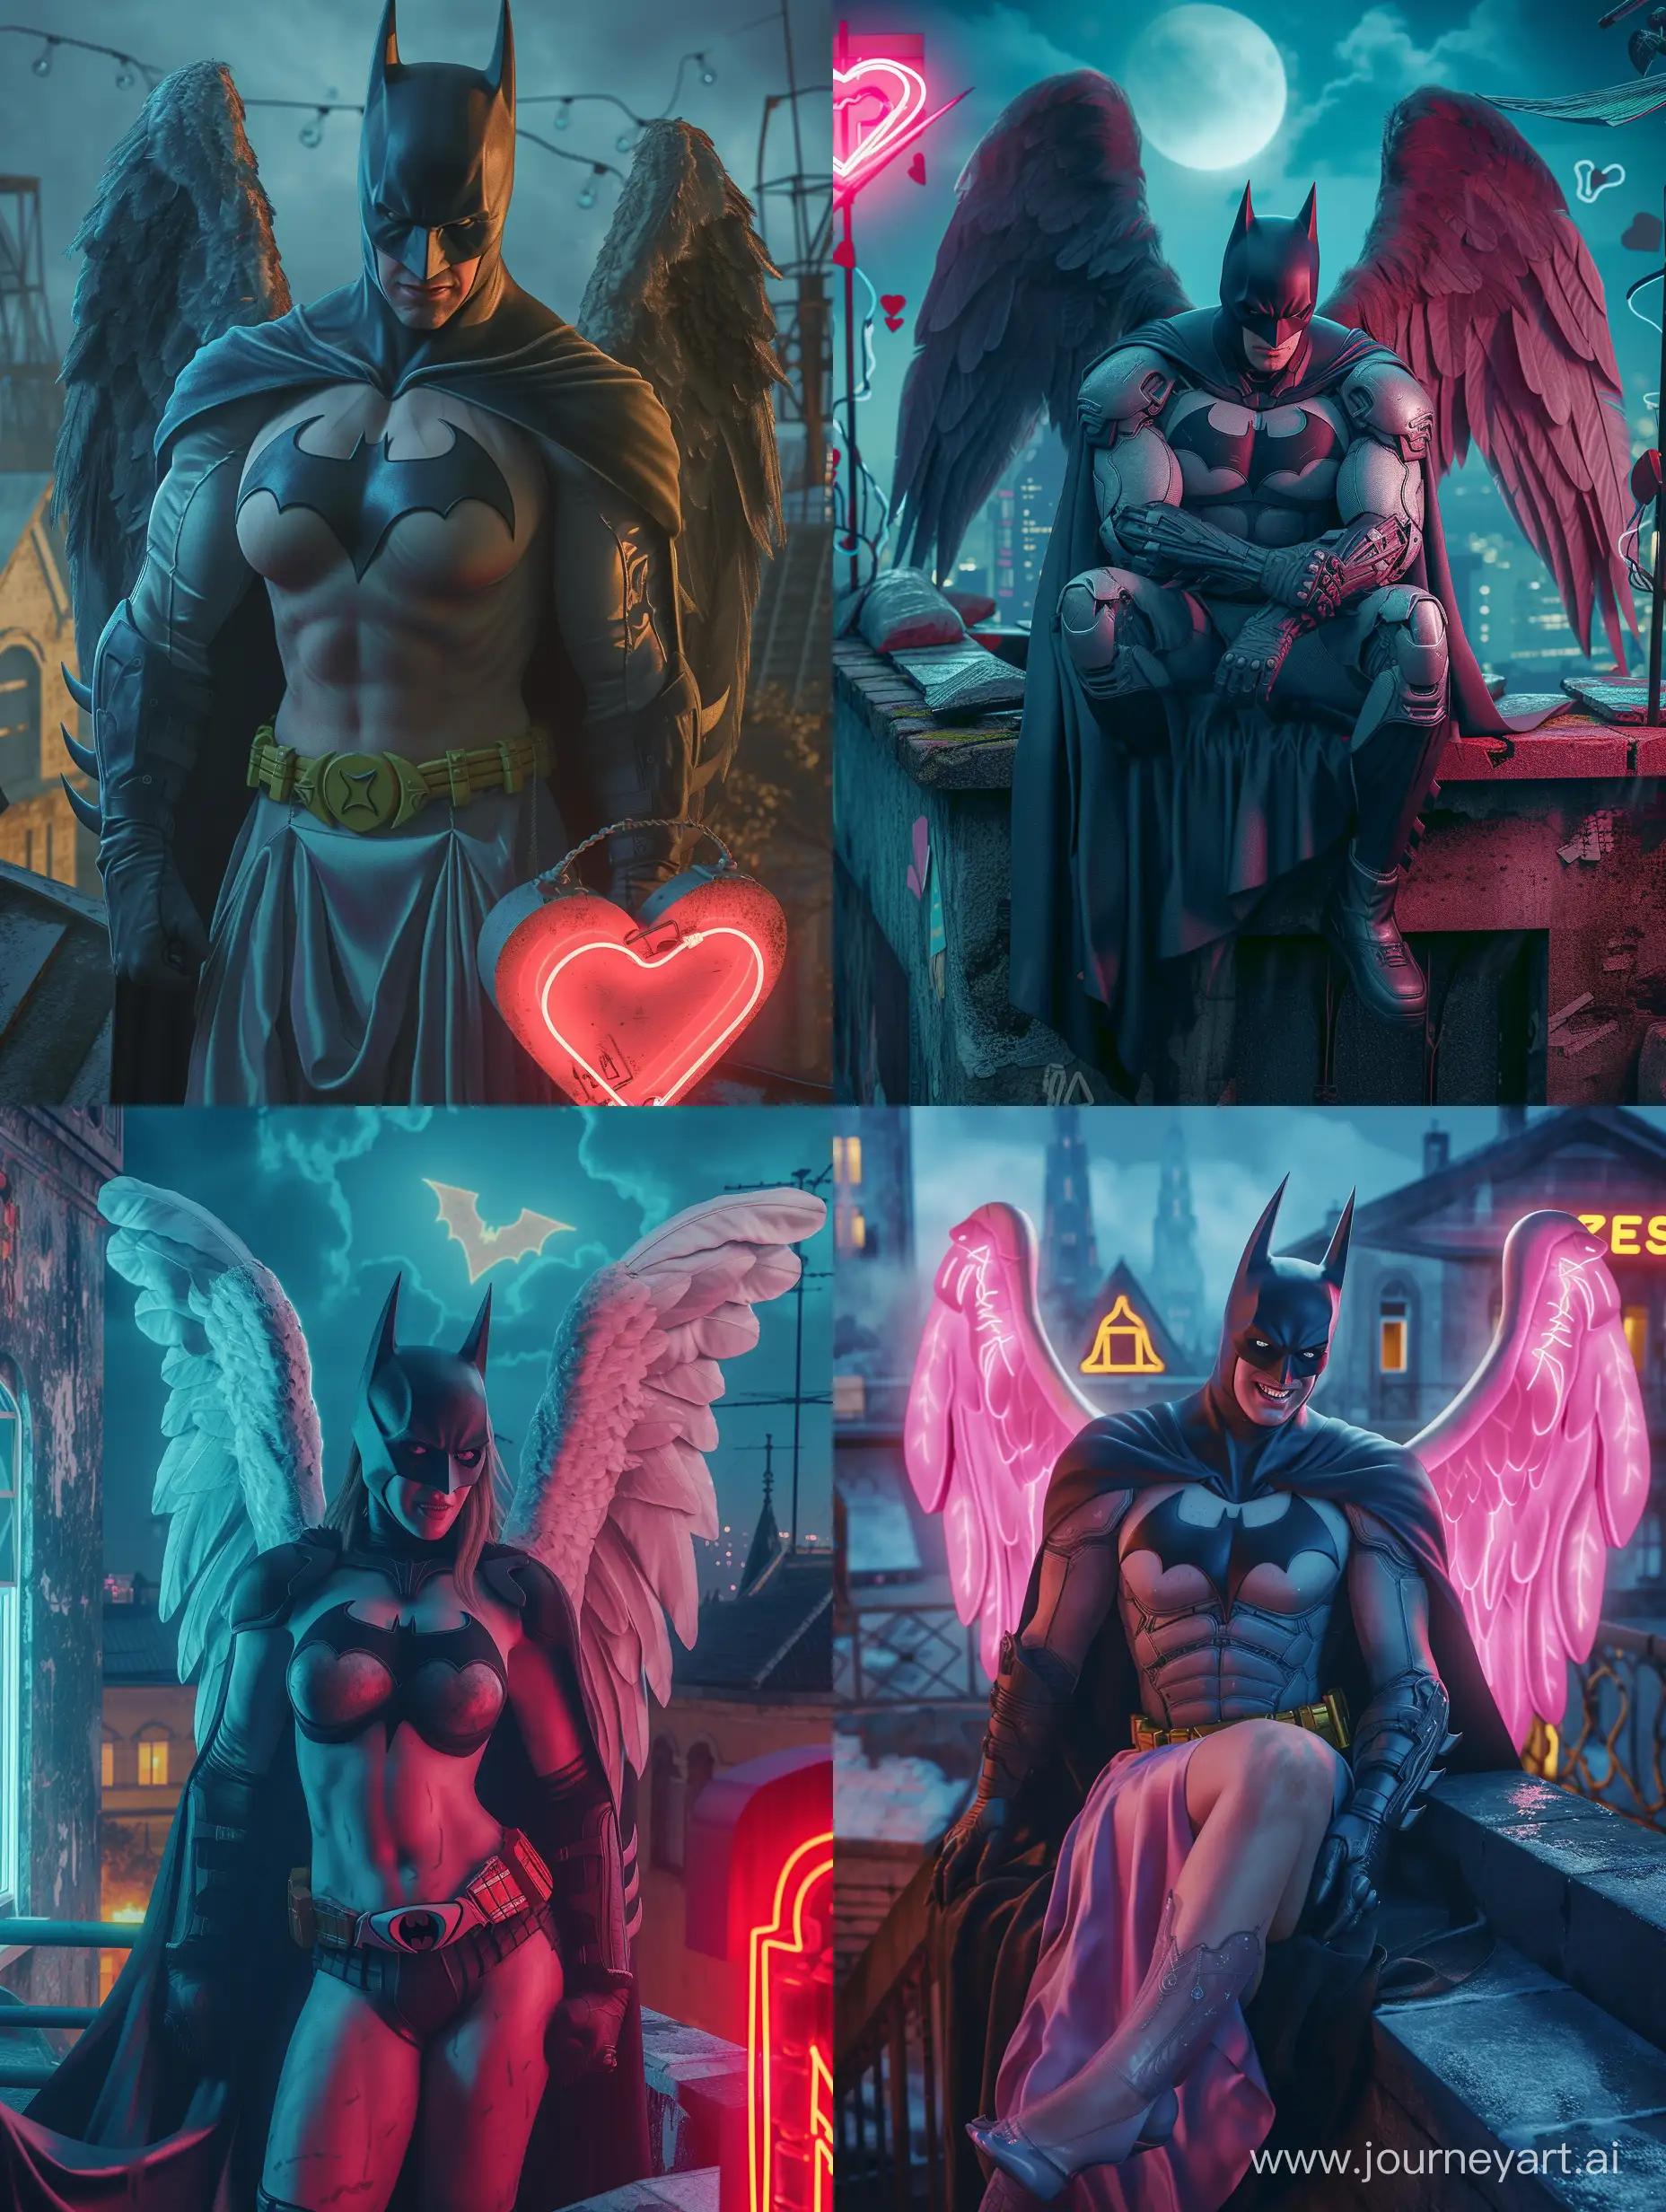 Sultry-Batman-with-Angel-Wings-on-Rooftop-at-Night